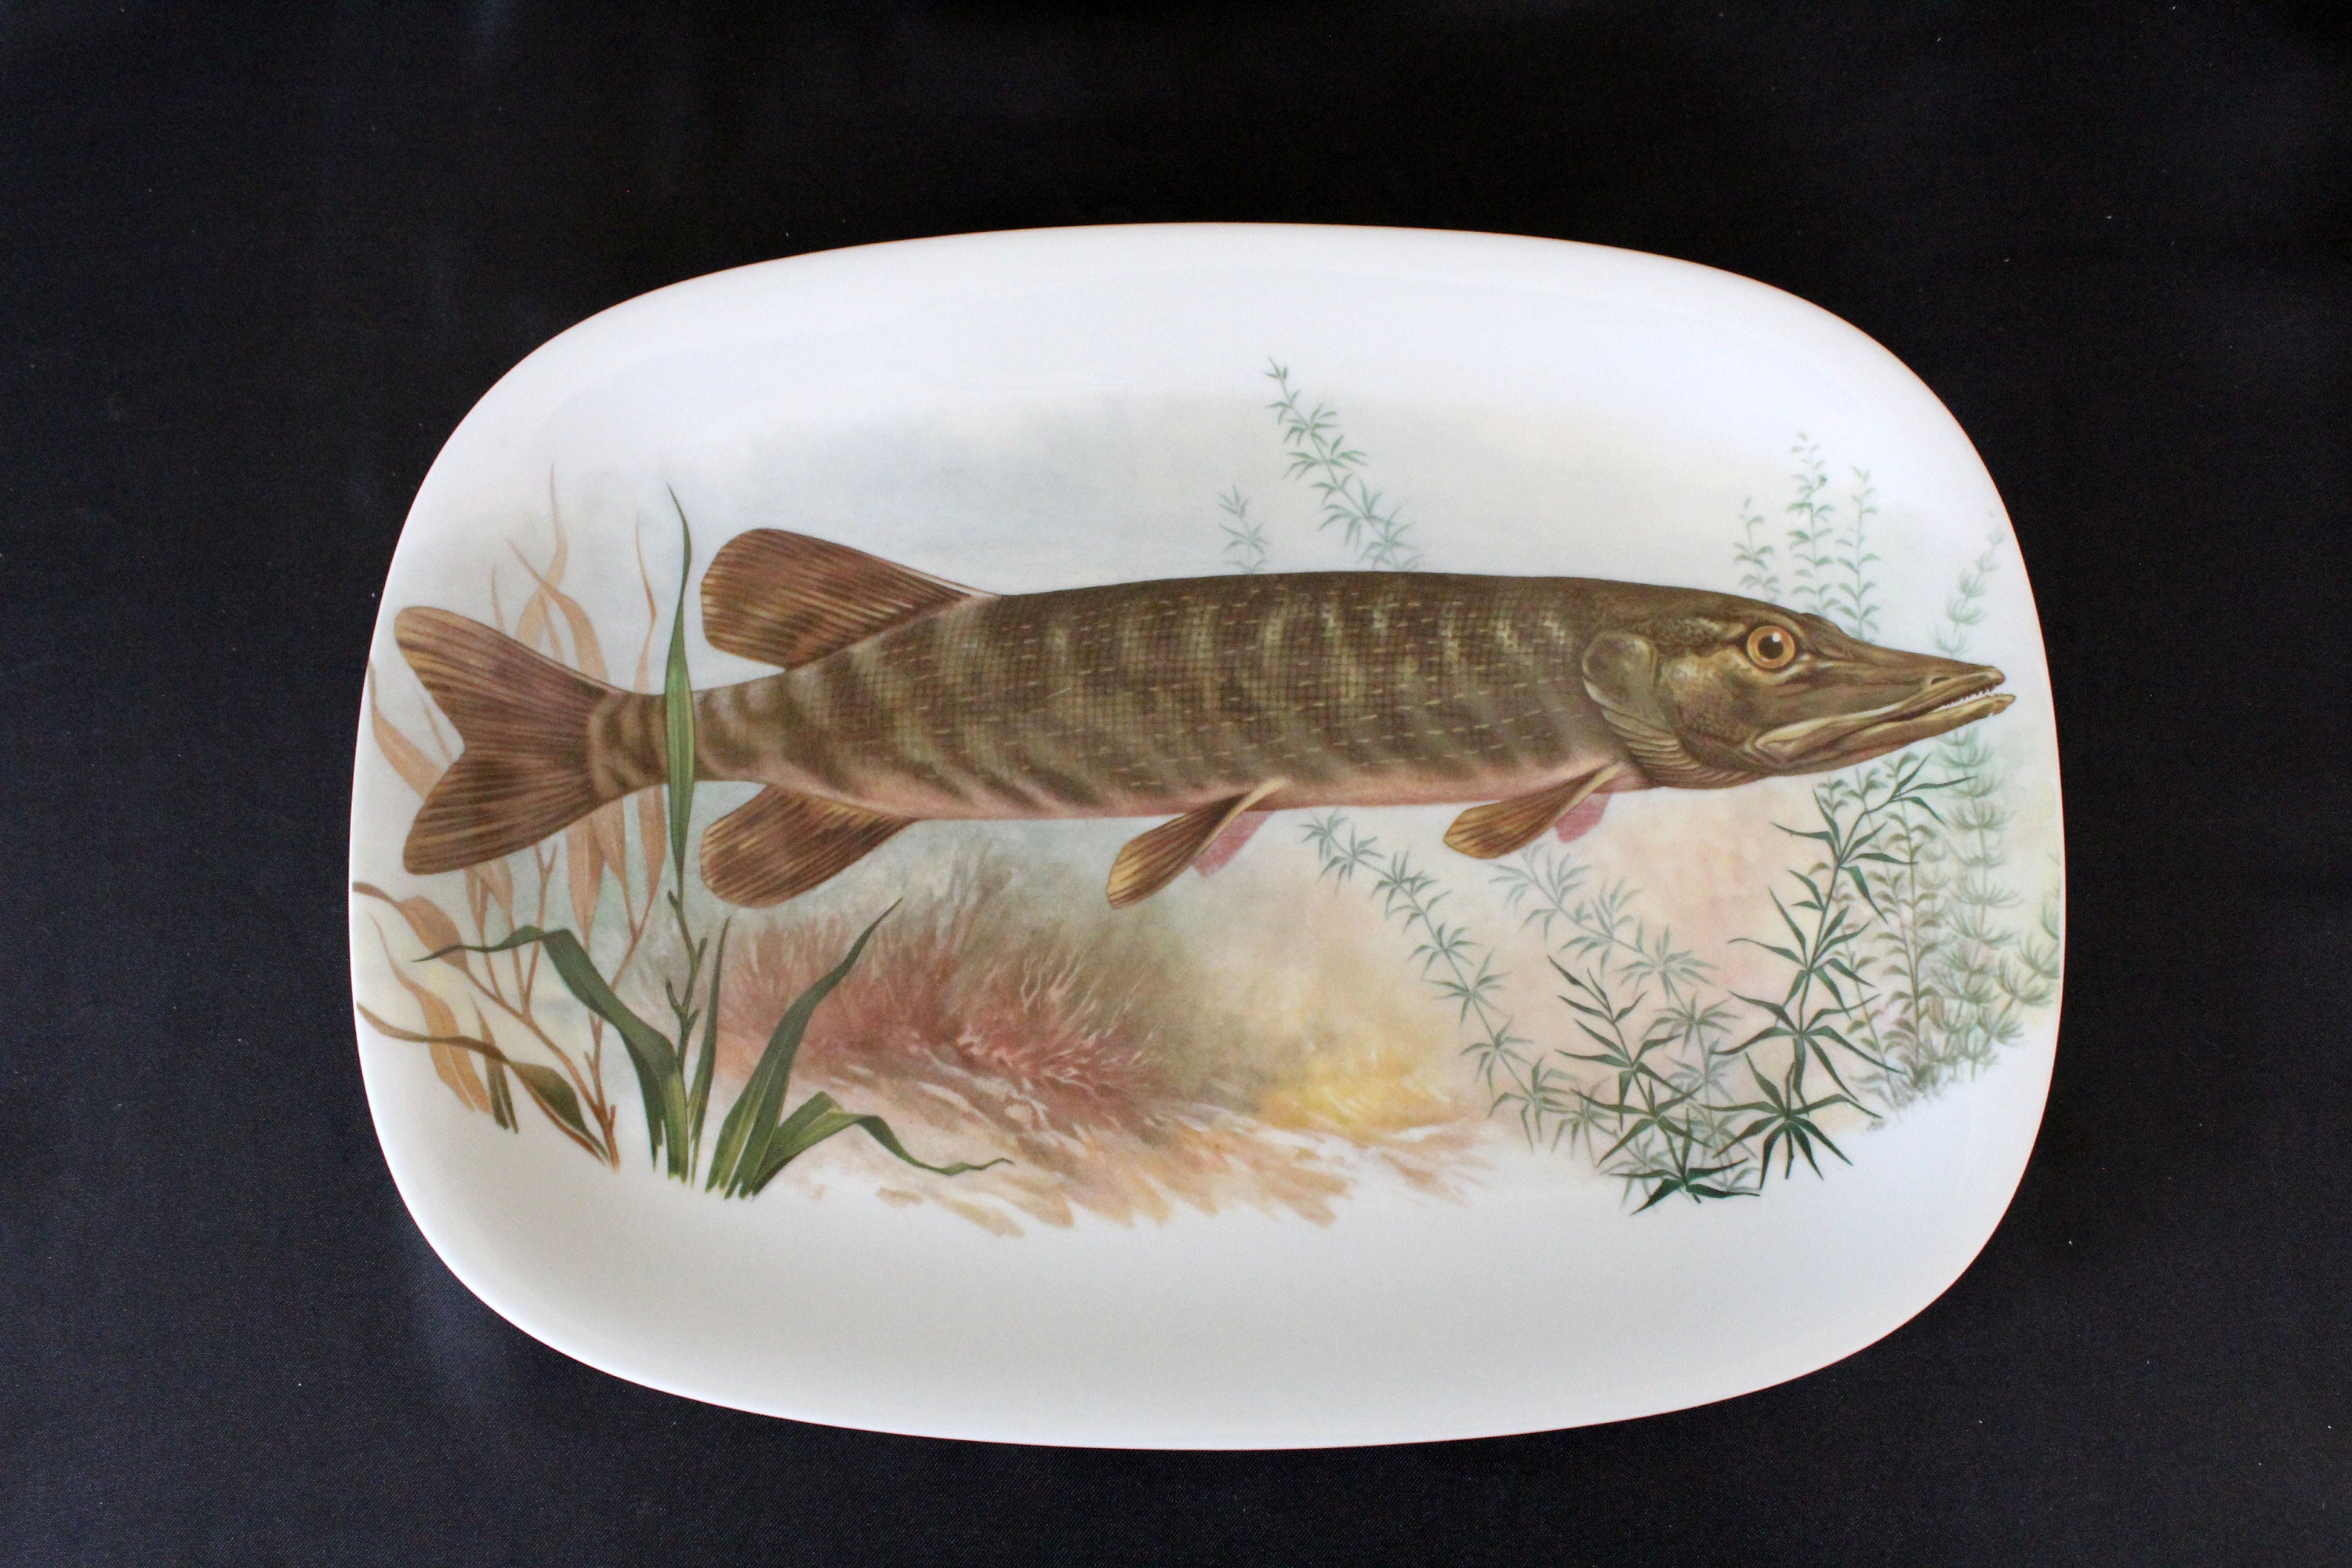 Vintage Porcelain Langenthal Swiss Serving Platter, Plate, Seafood Fish Scenic Water View, Large Switzerland